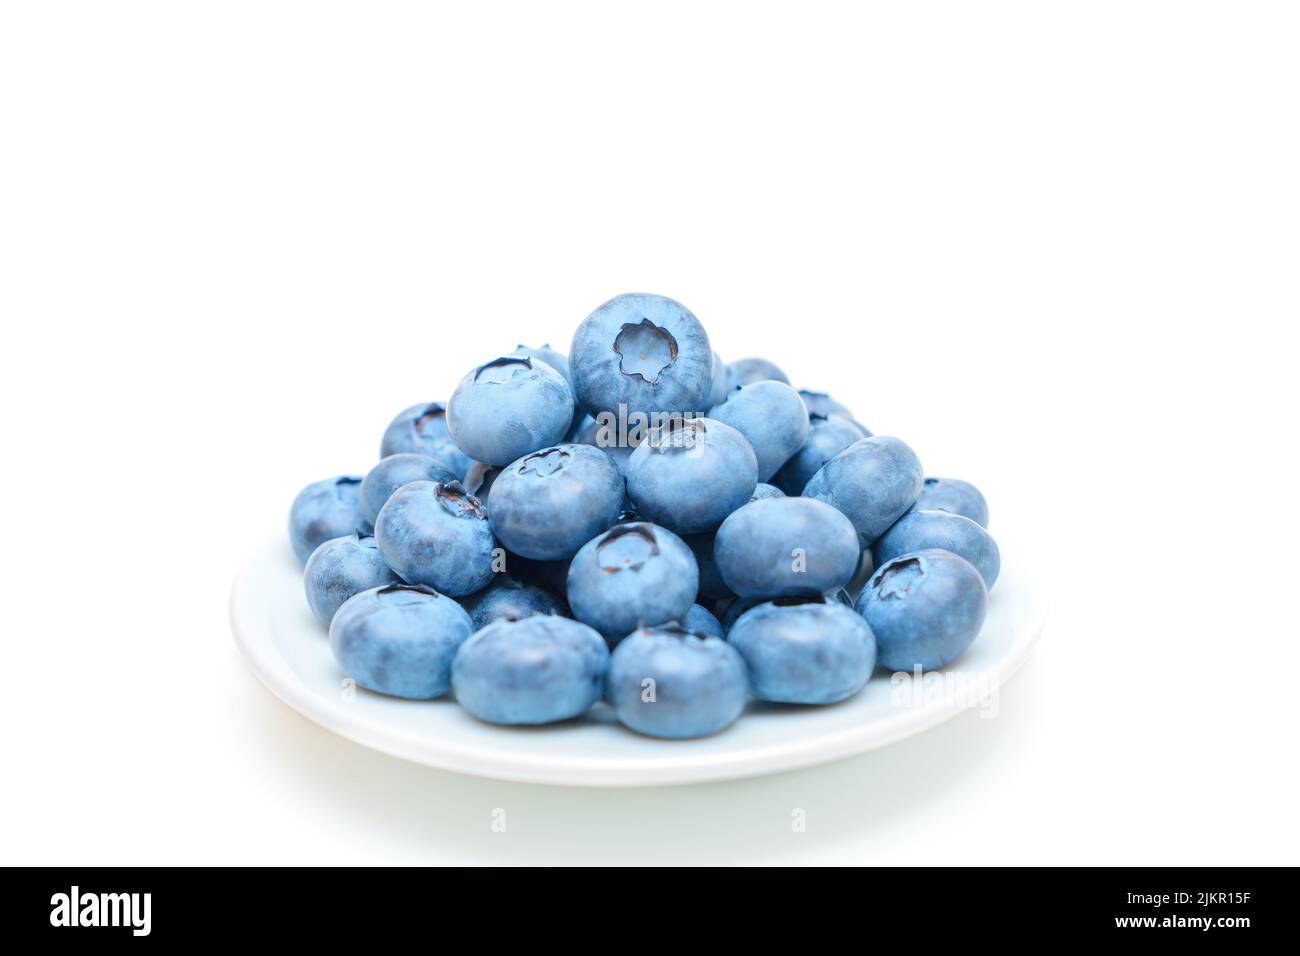 Pile of fresh ripe blueberries on a white saucer isolated on white background, selective focus. Stock Photo